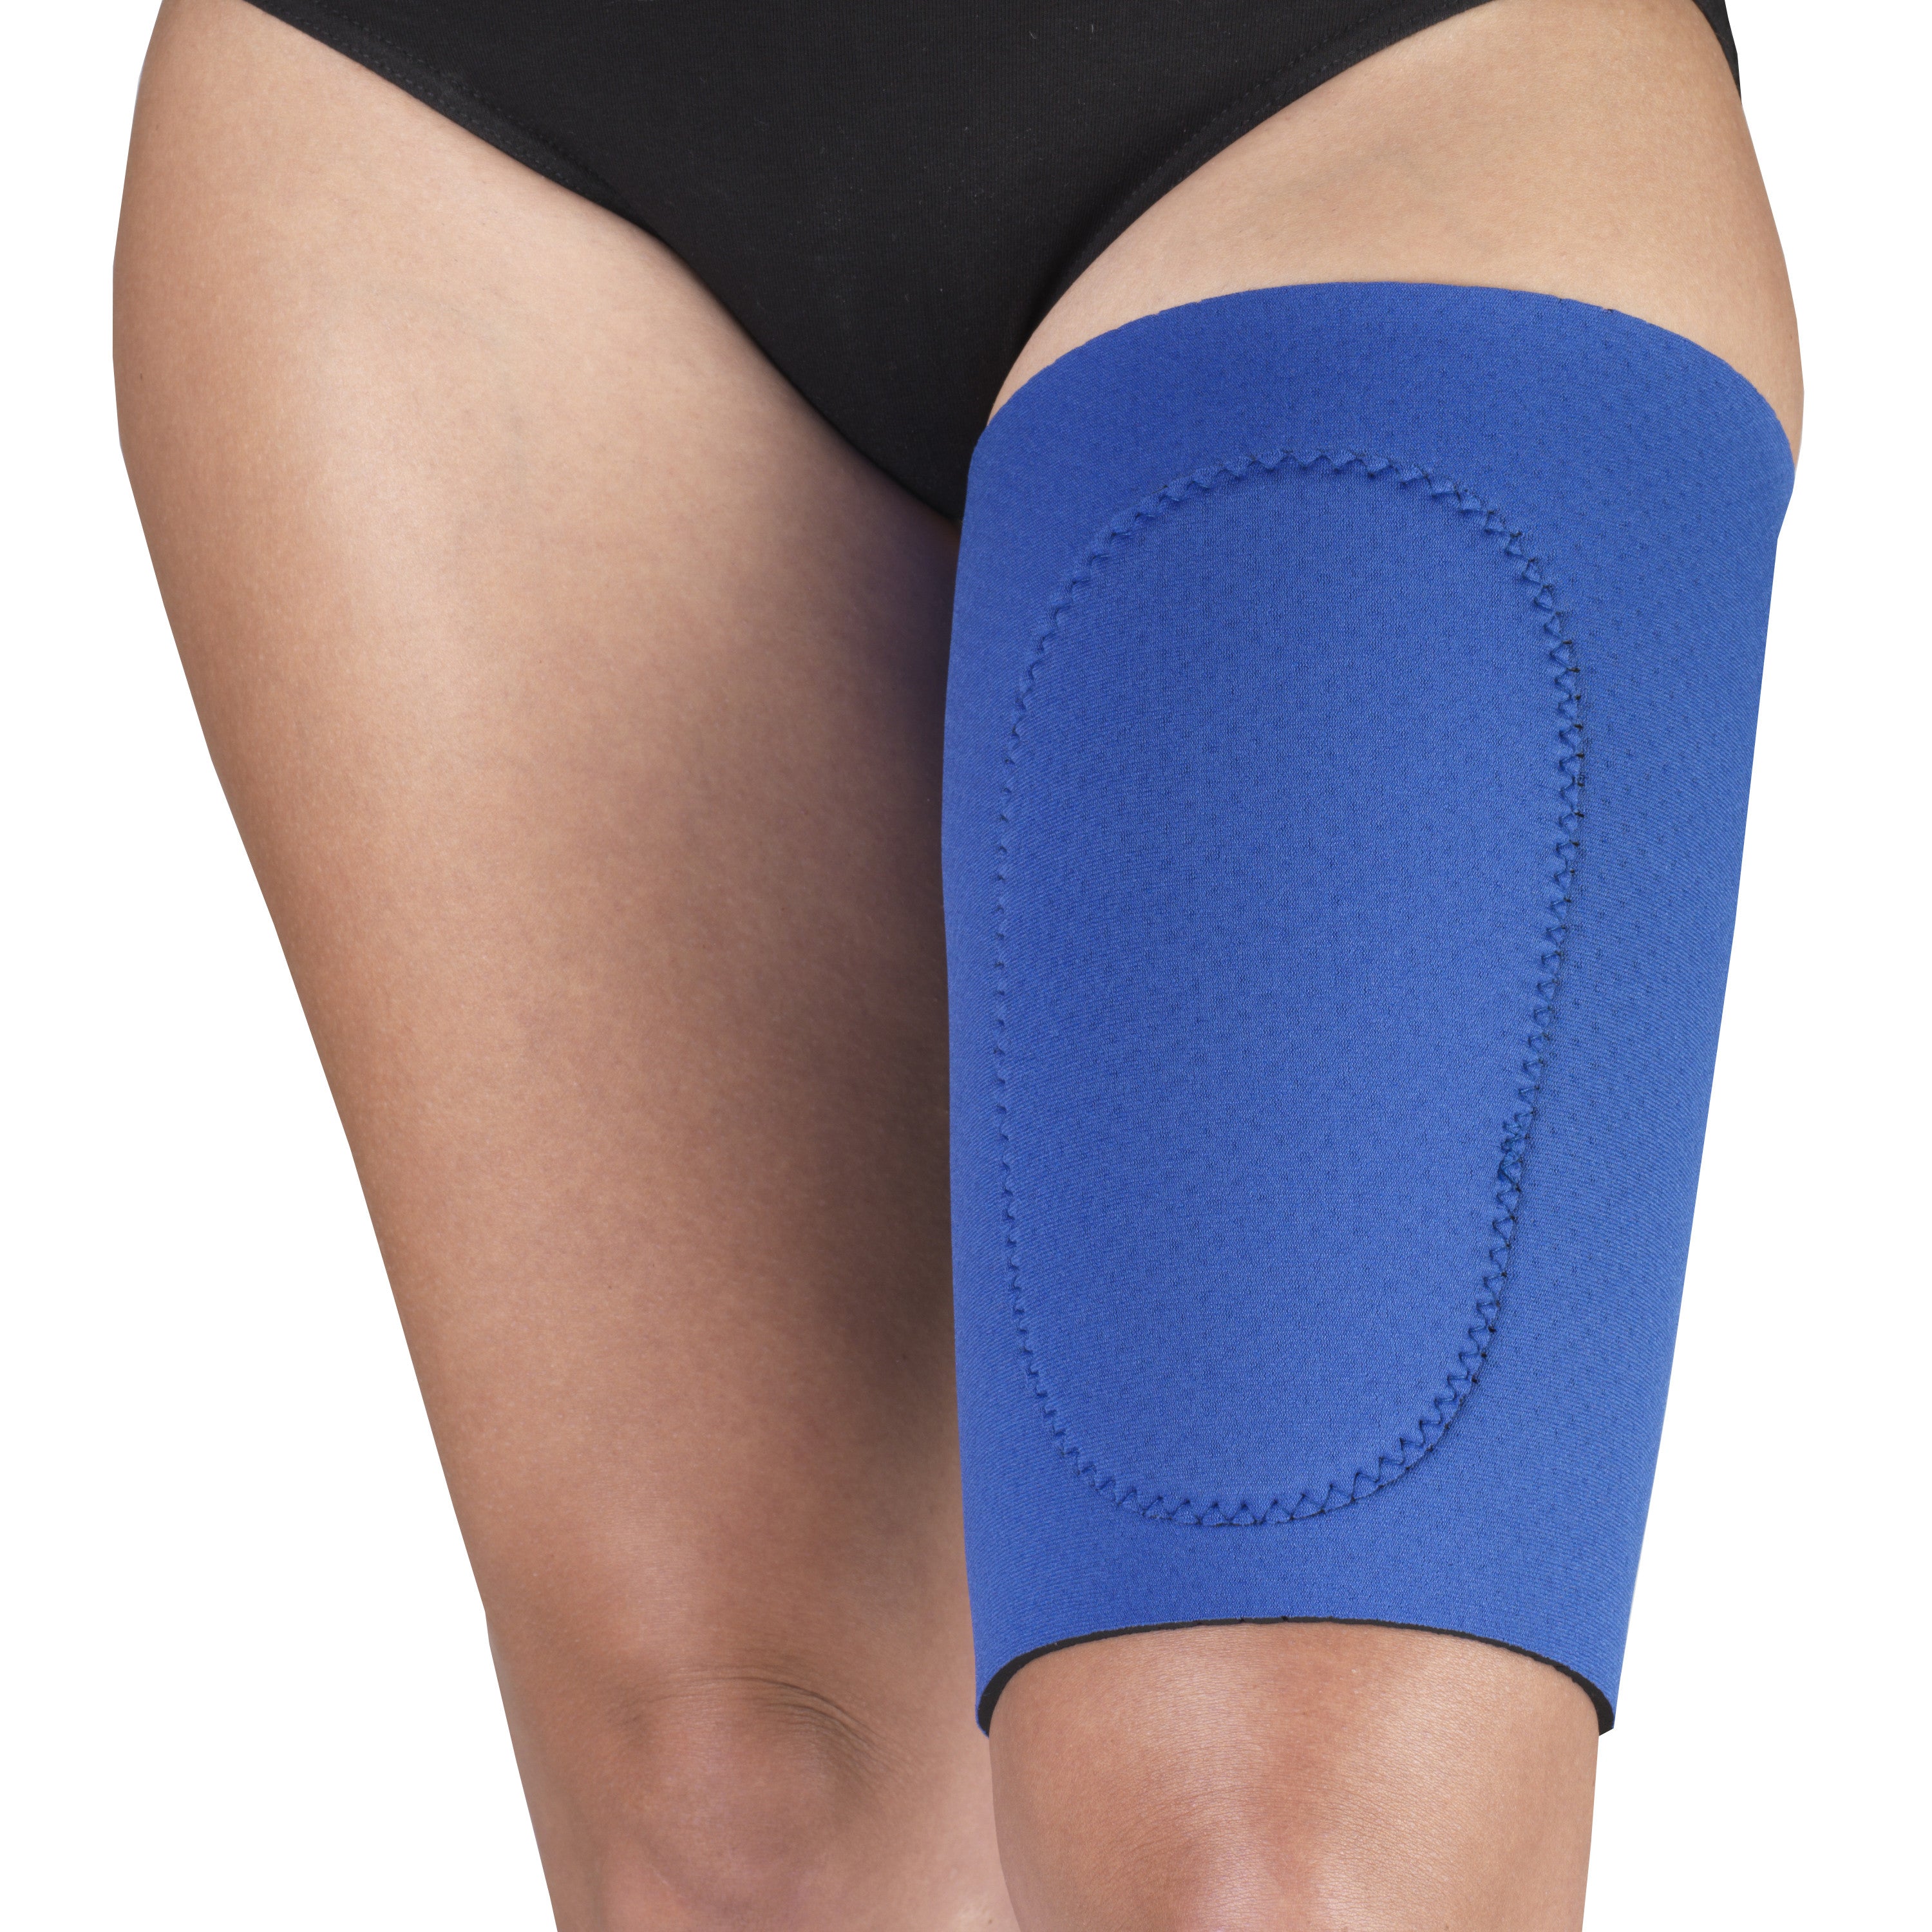 9-inch Breathable Lumbar Support with 4 plastic stays - Medigenix